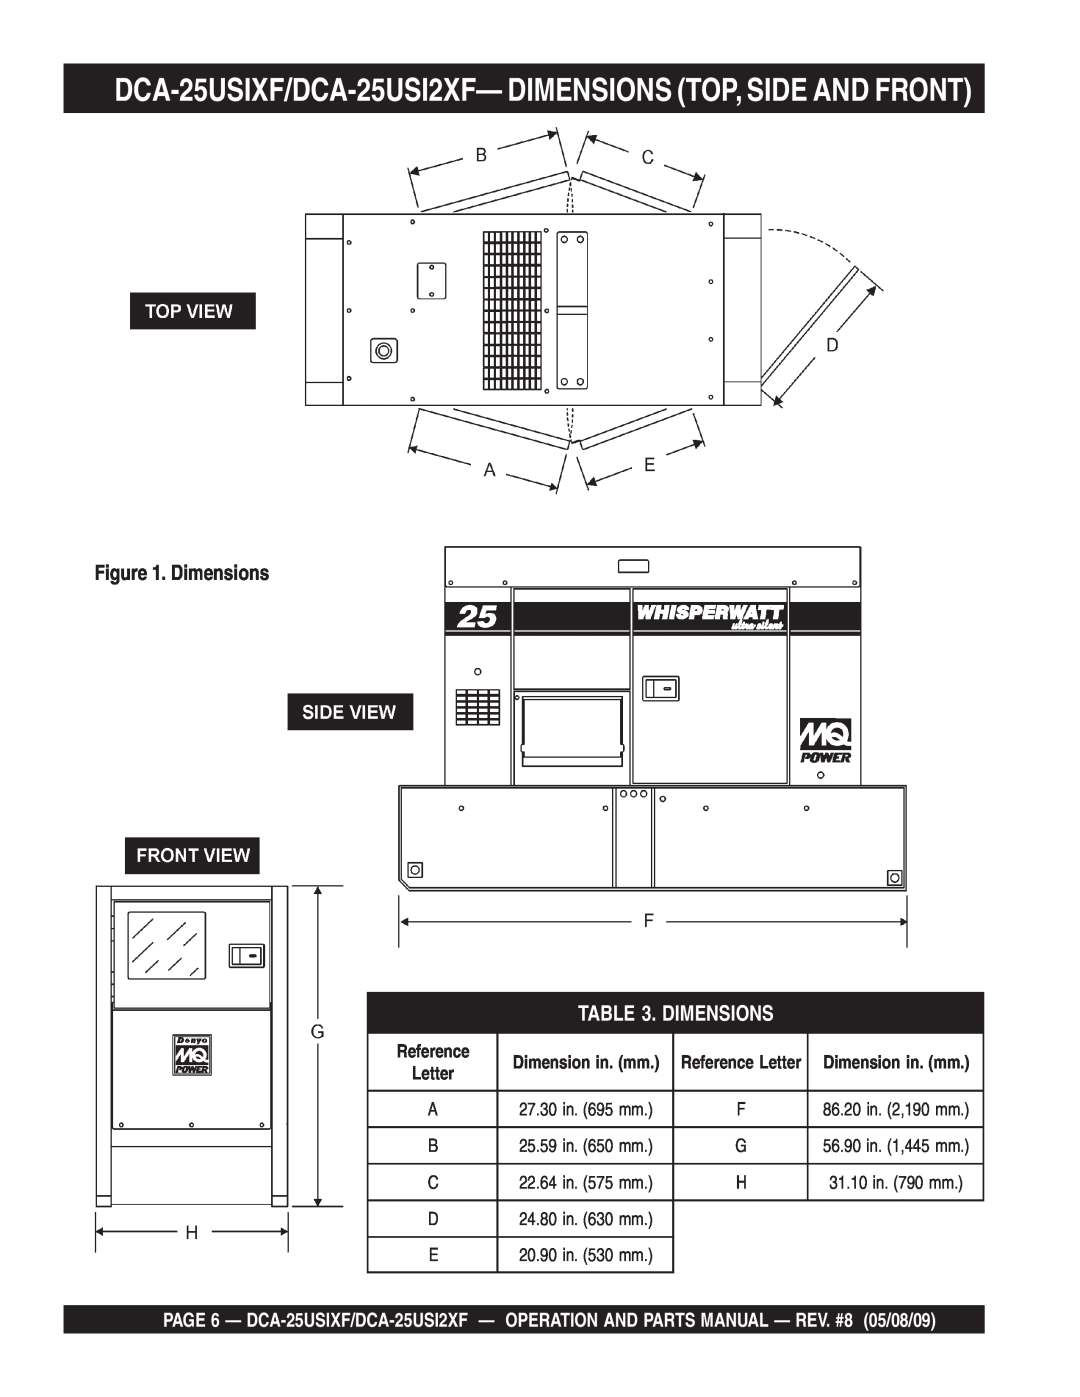 Multiquip DCA-25USIXF/DCA-25USI2XF- DIMENSIONS TOP, SIDE AND FRONT, Dimensions, Reference, Dimension in. mm 